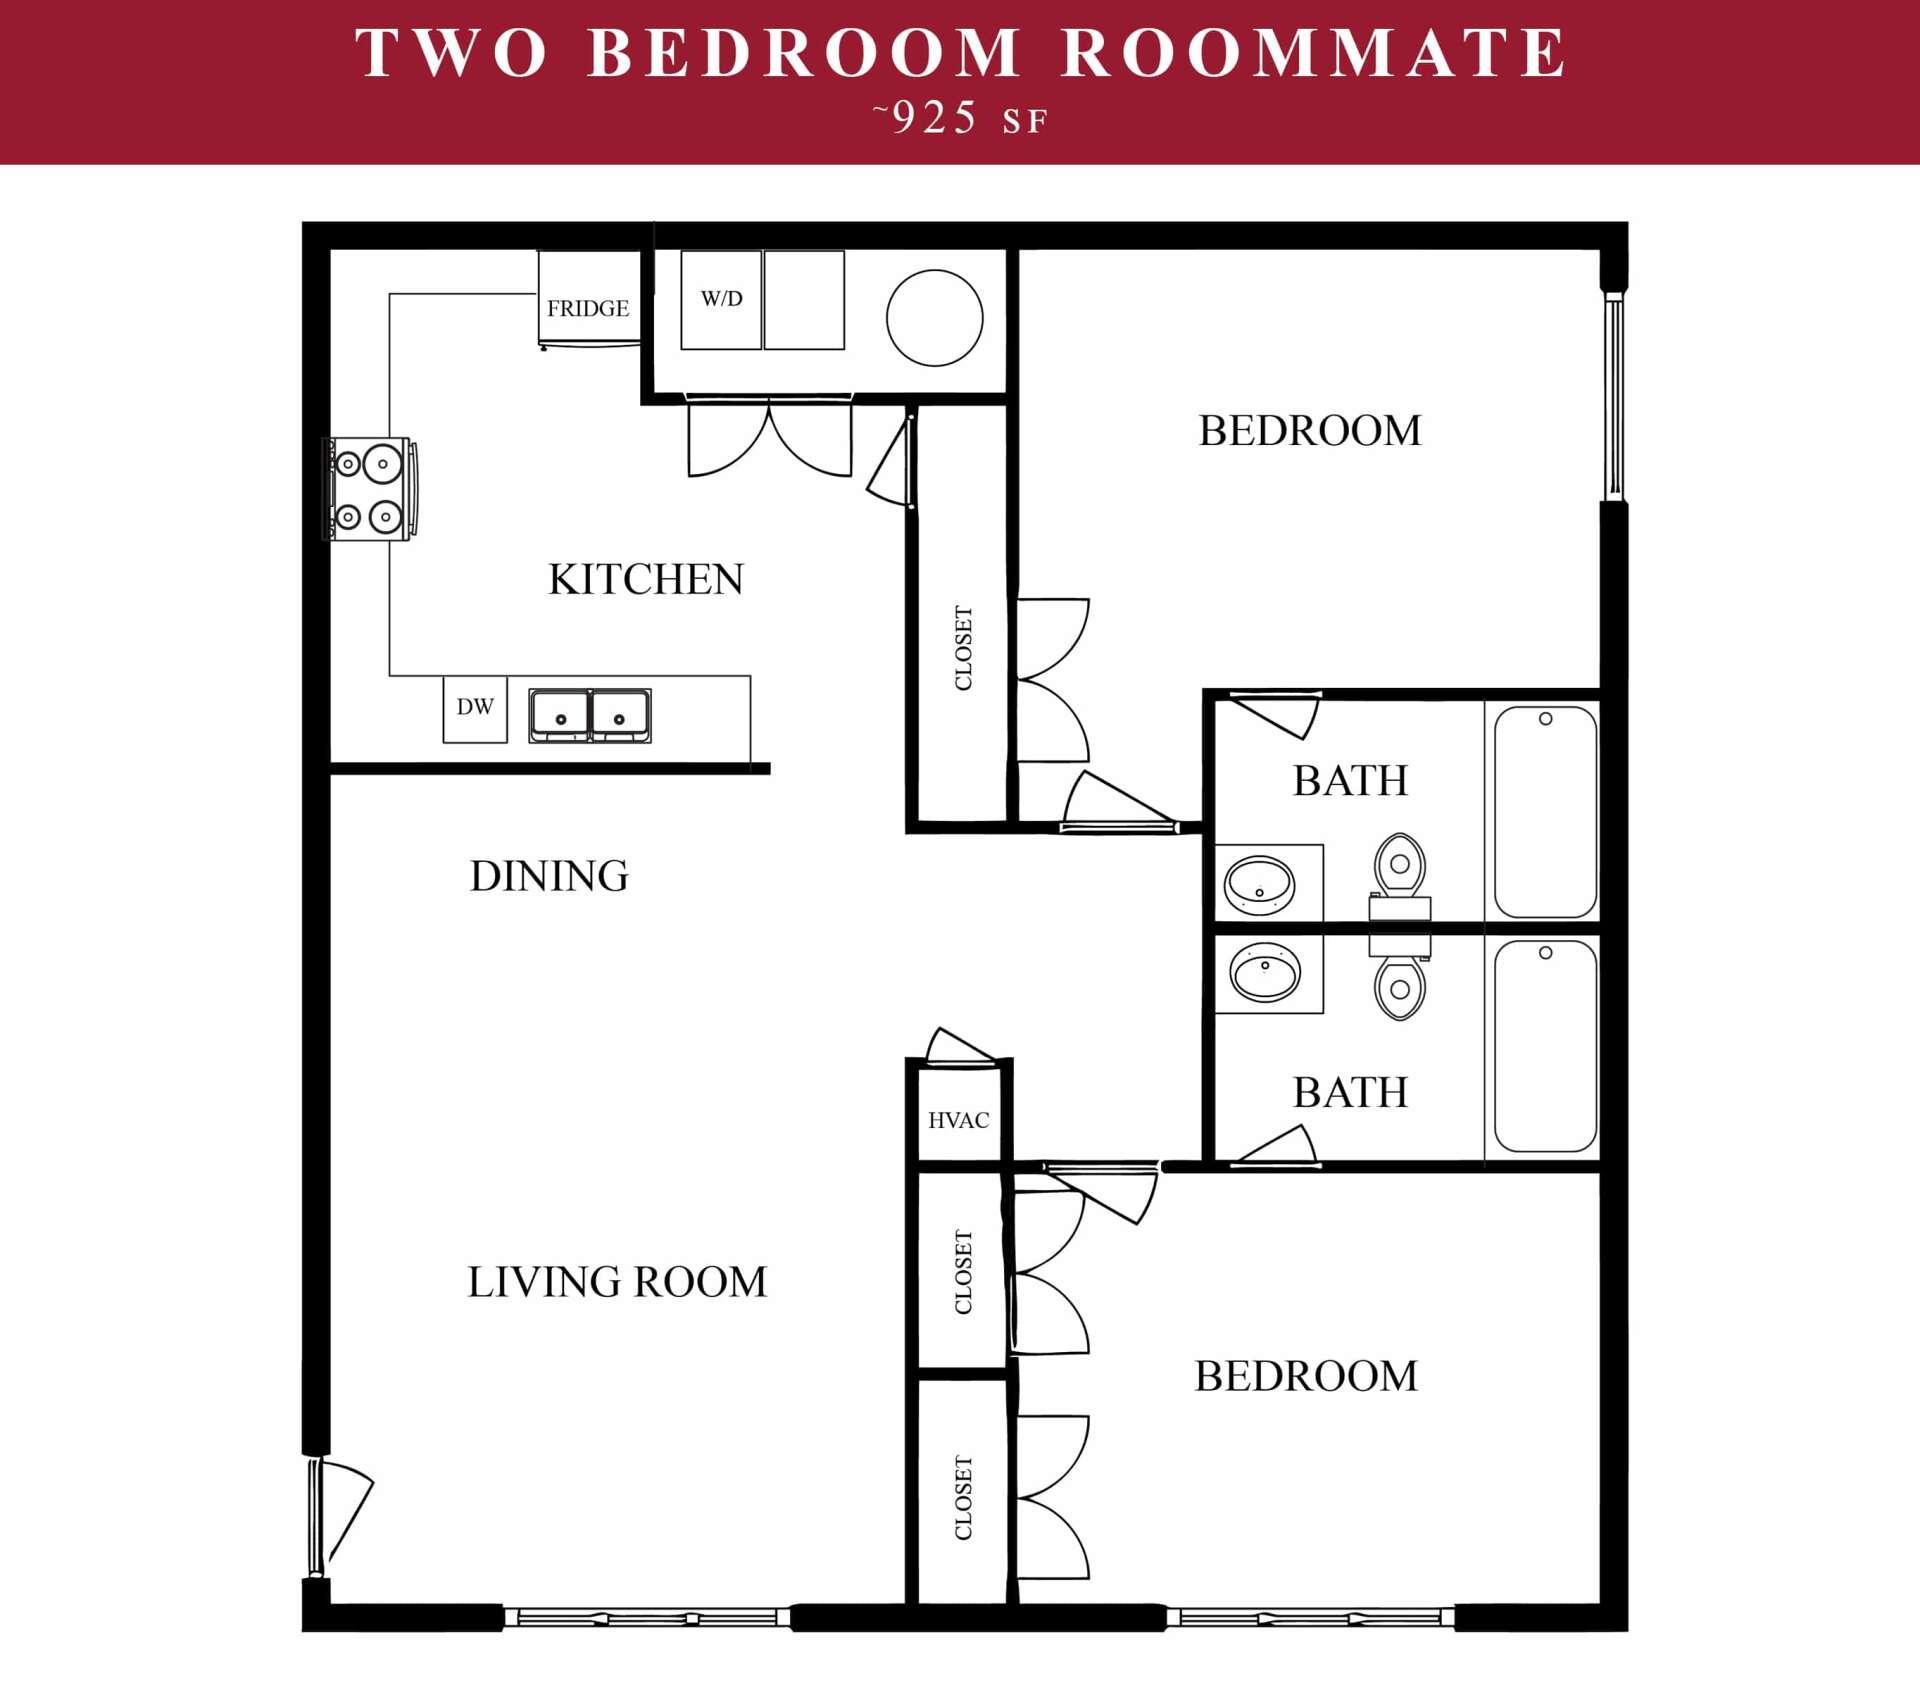 2 Bedroom Roommate floor plan available at Pines at Southridge apartments